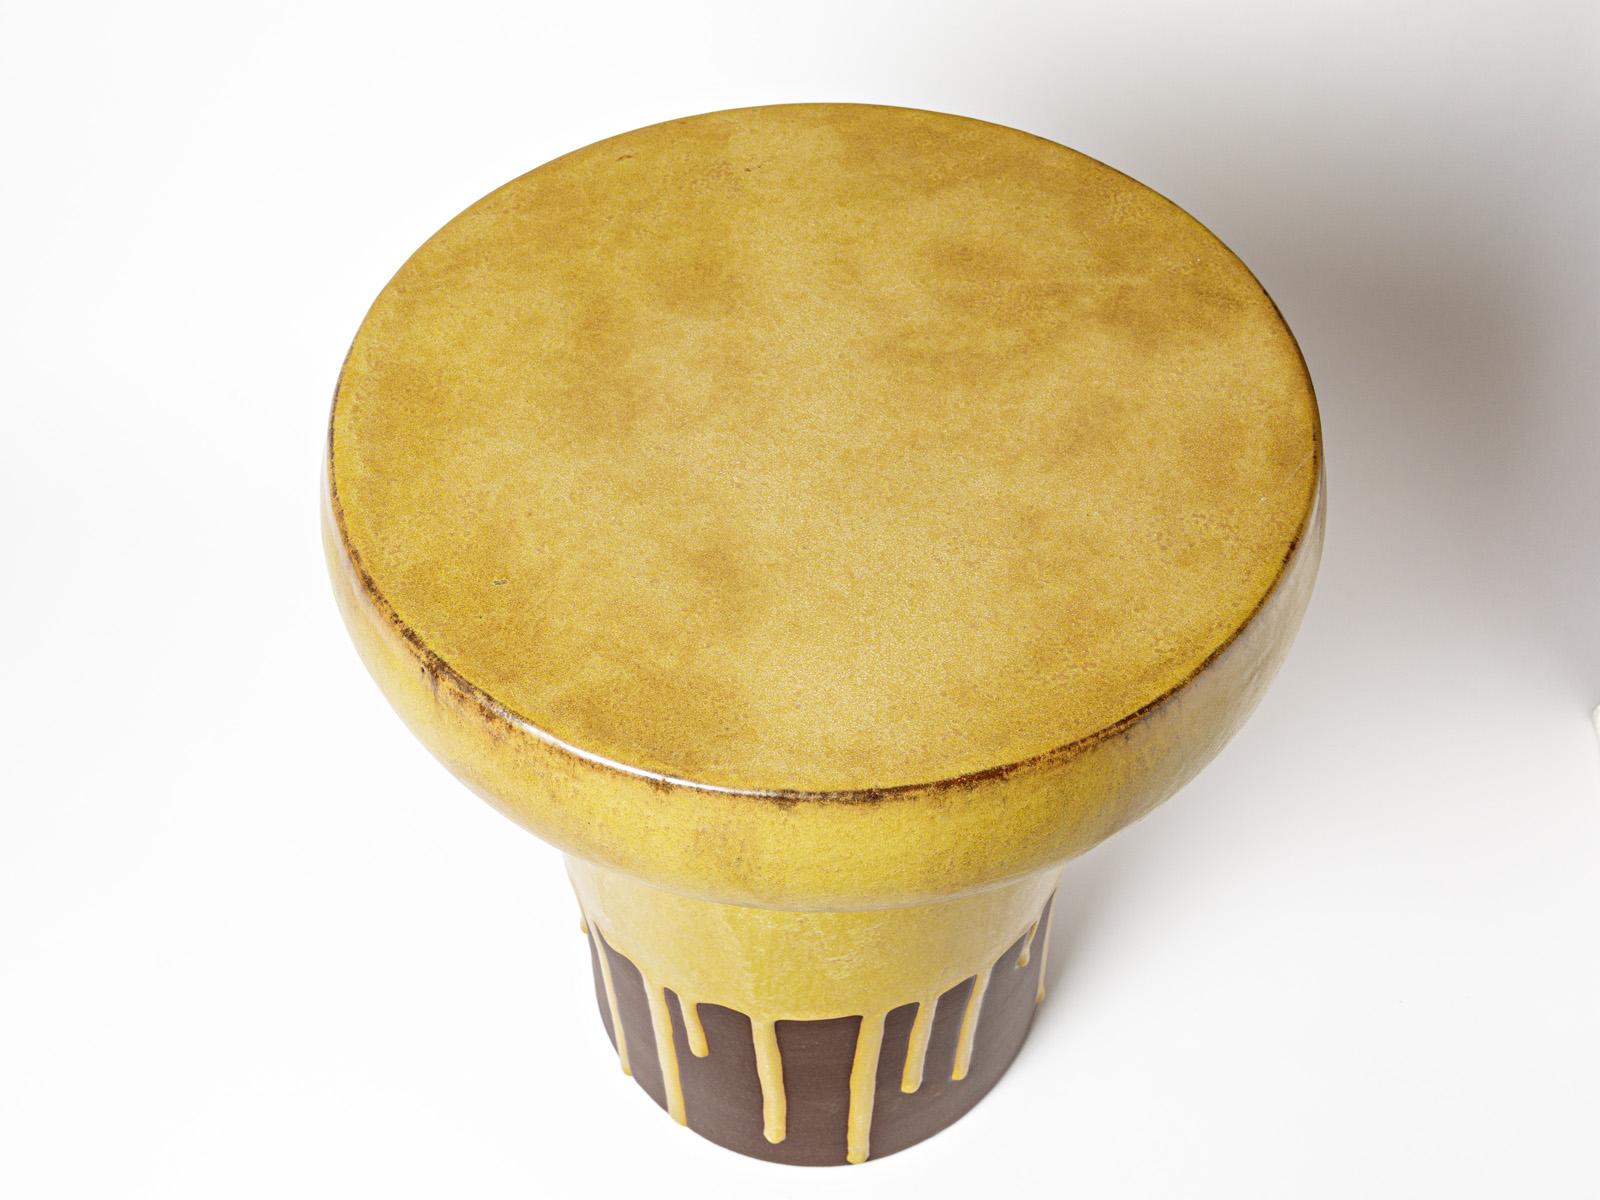 Contemporary Ceramic Stool or Table with Glazes Decoration by Mia Jensen, circa 2022